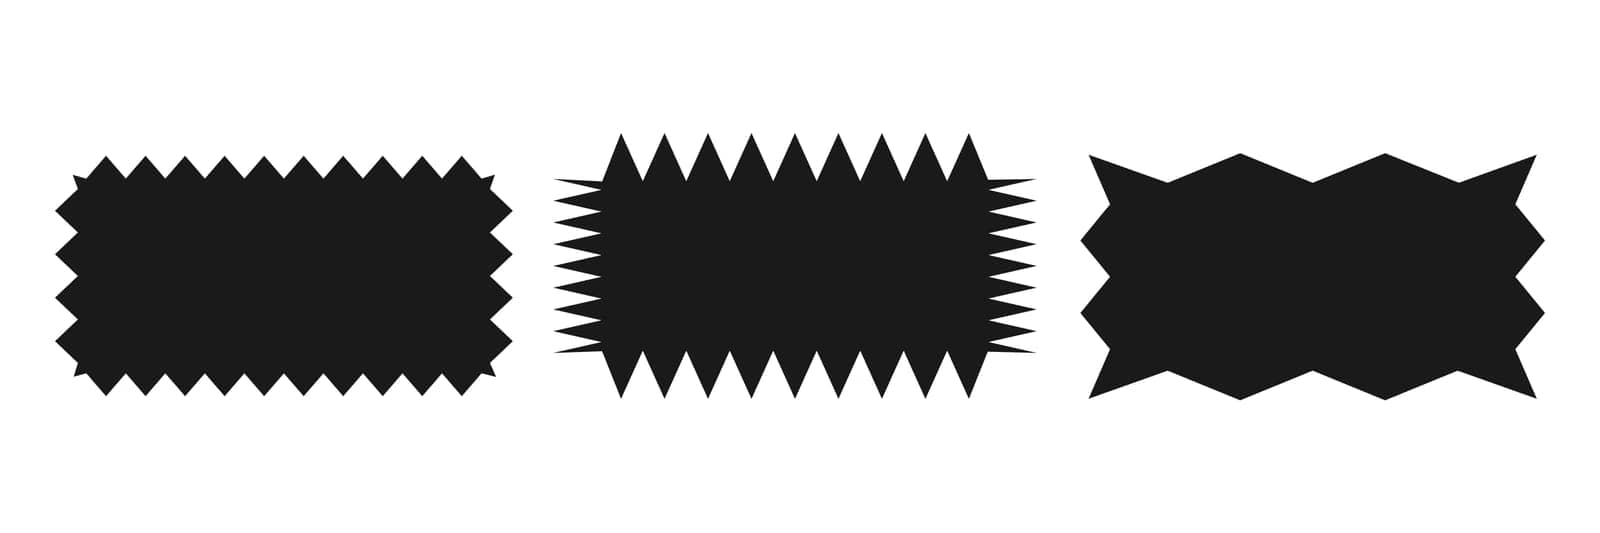 Serrated rectangle.A set of uneven zigzag rectangular shapes. Black color. Isolated elements for design of text box, button, badge, banner, tag, sticker, badge. Vector illustration.